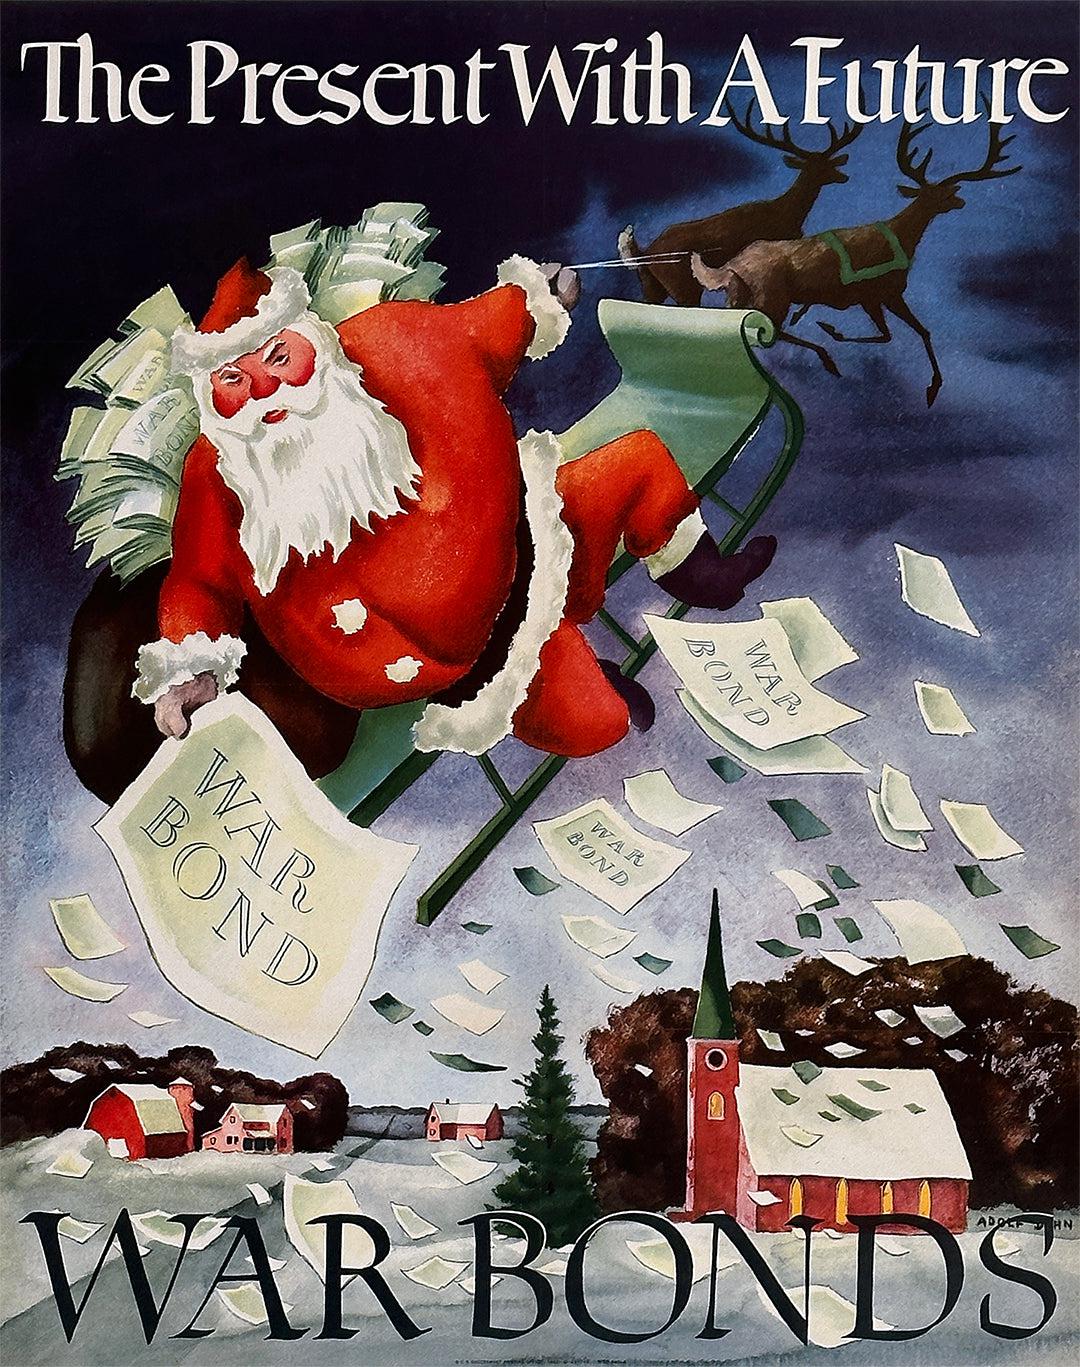 Original Vintage WWII War Bonds Poster The Present with a Future Santa Claus 1942